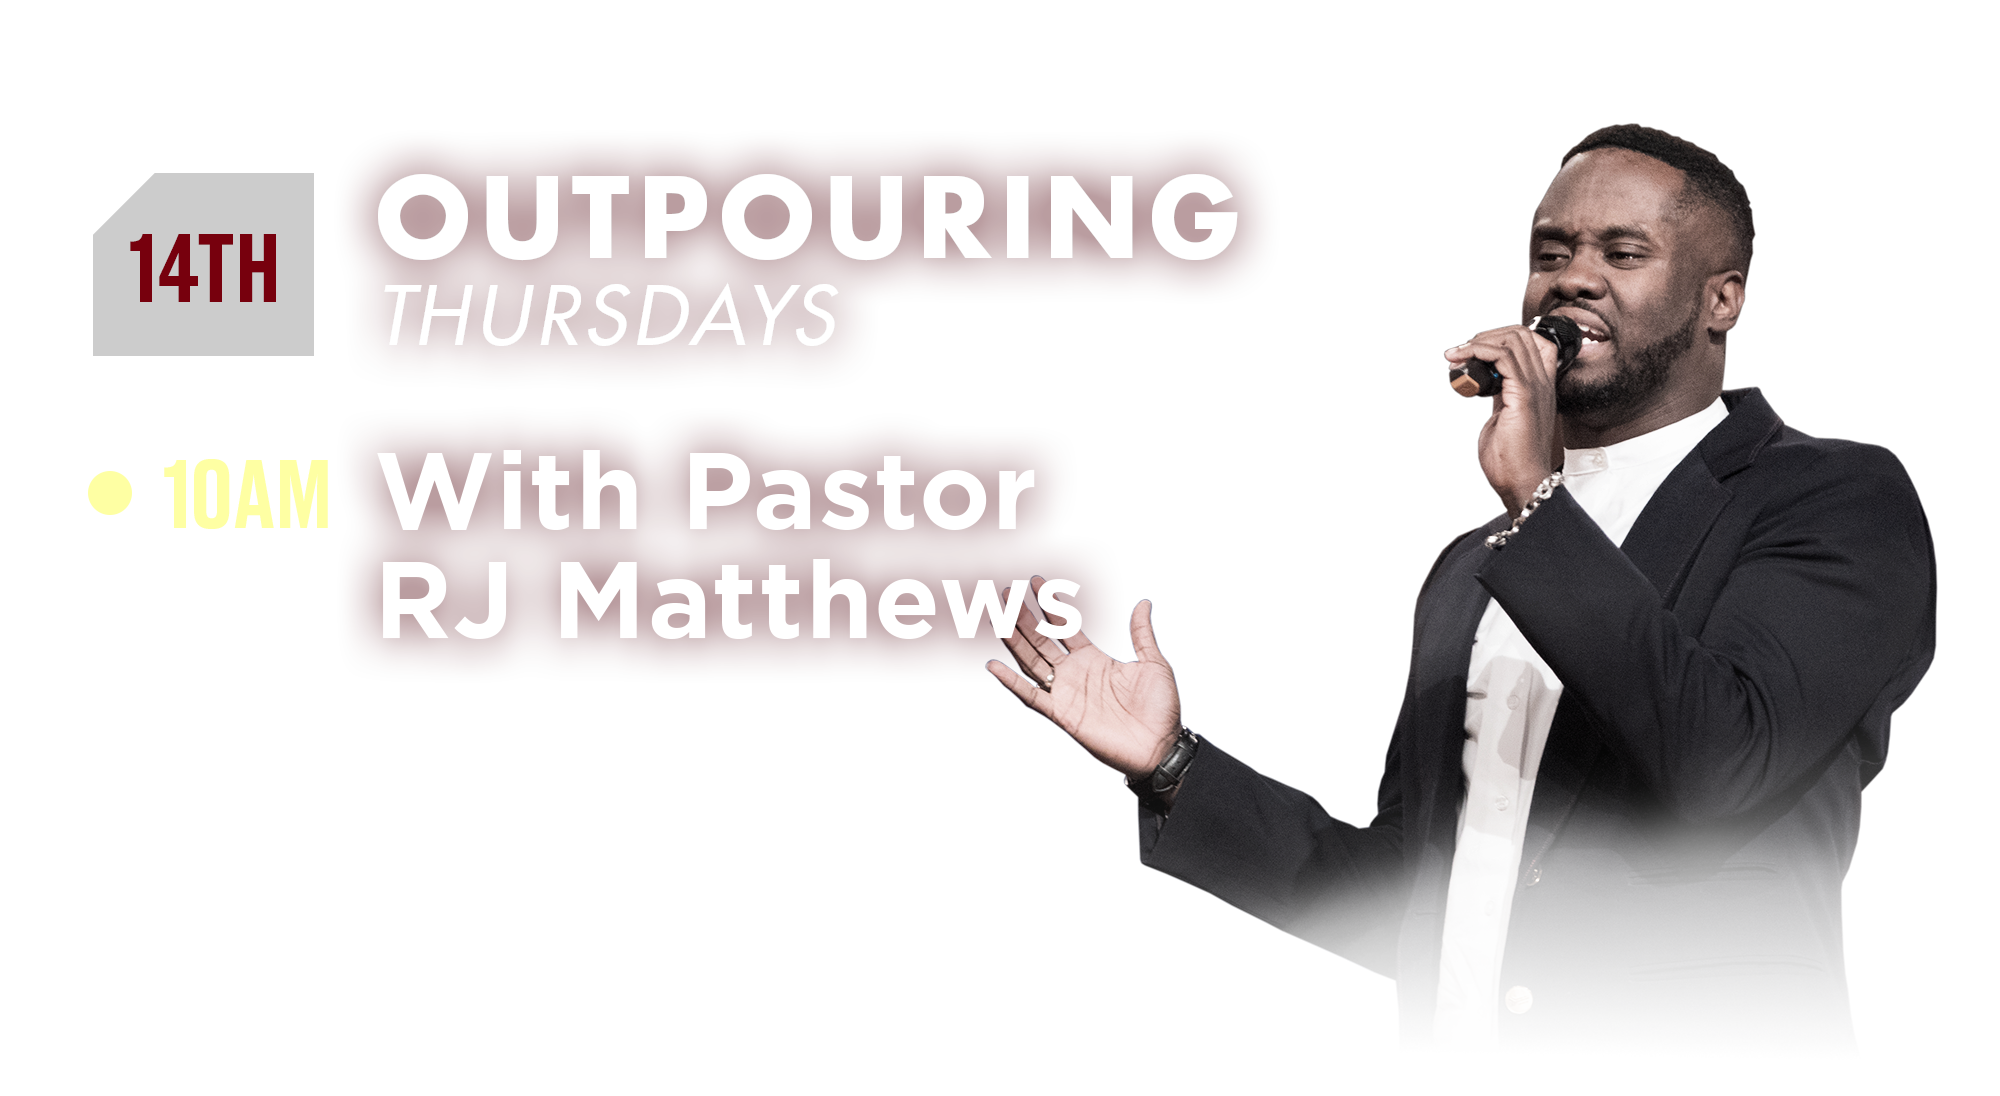 14th Outpouring Thursdays 10AM with Pastor RJ Matthews